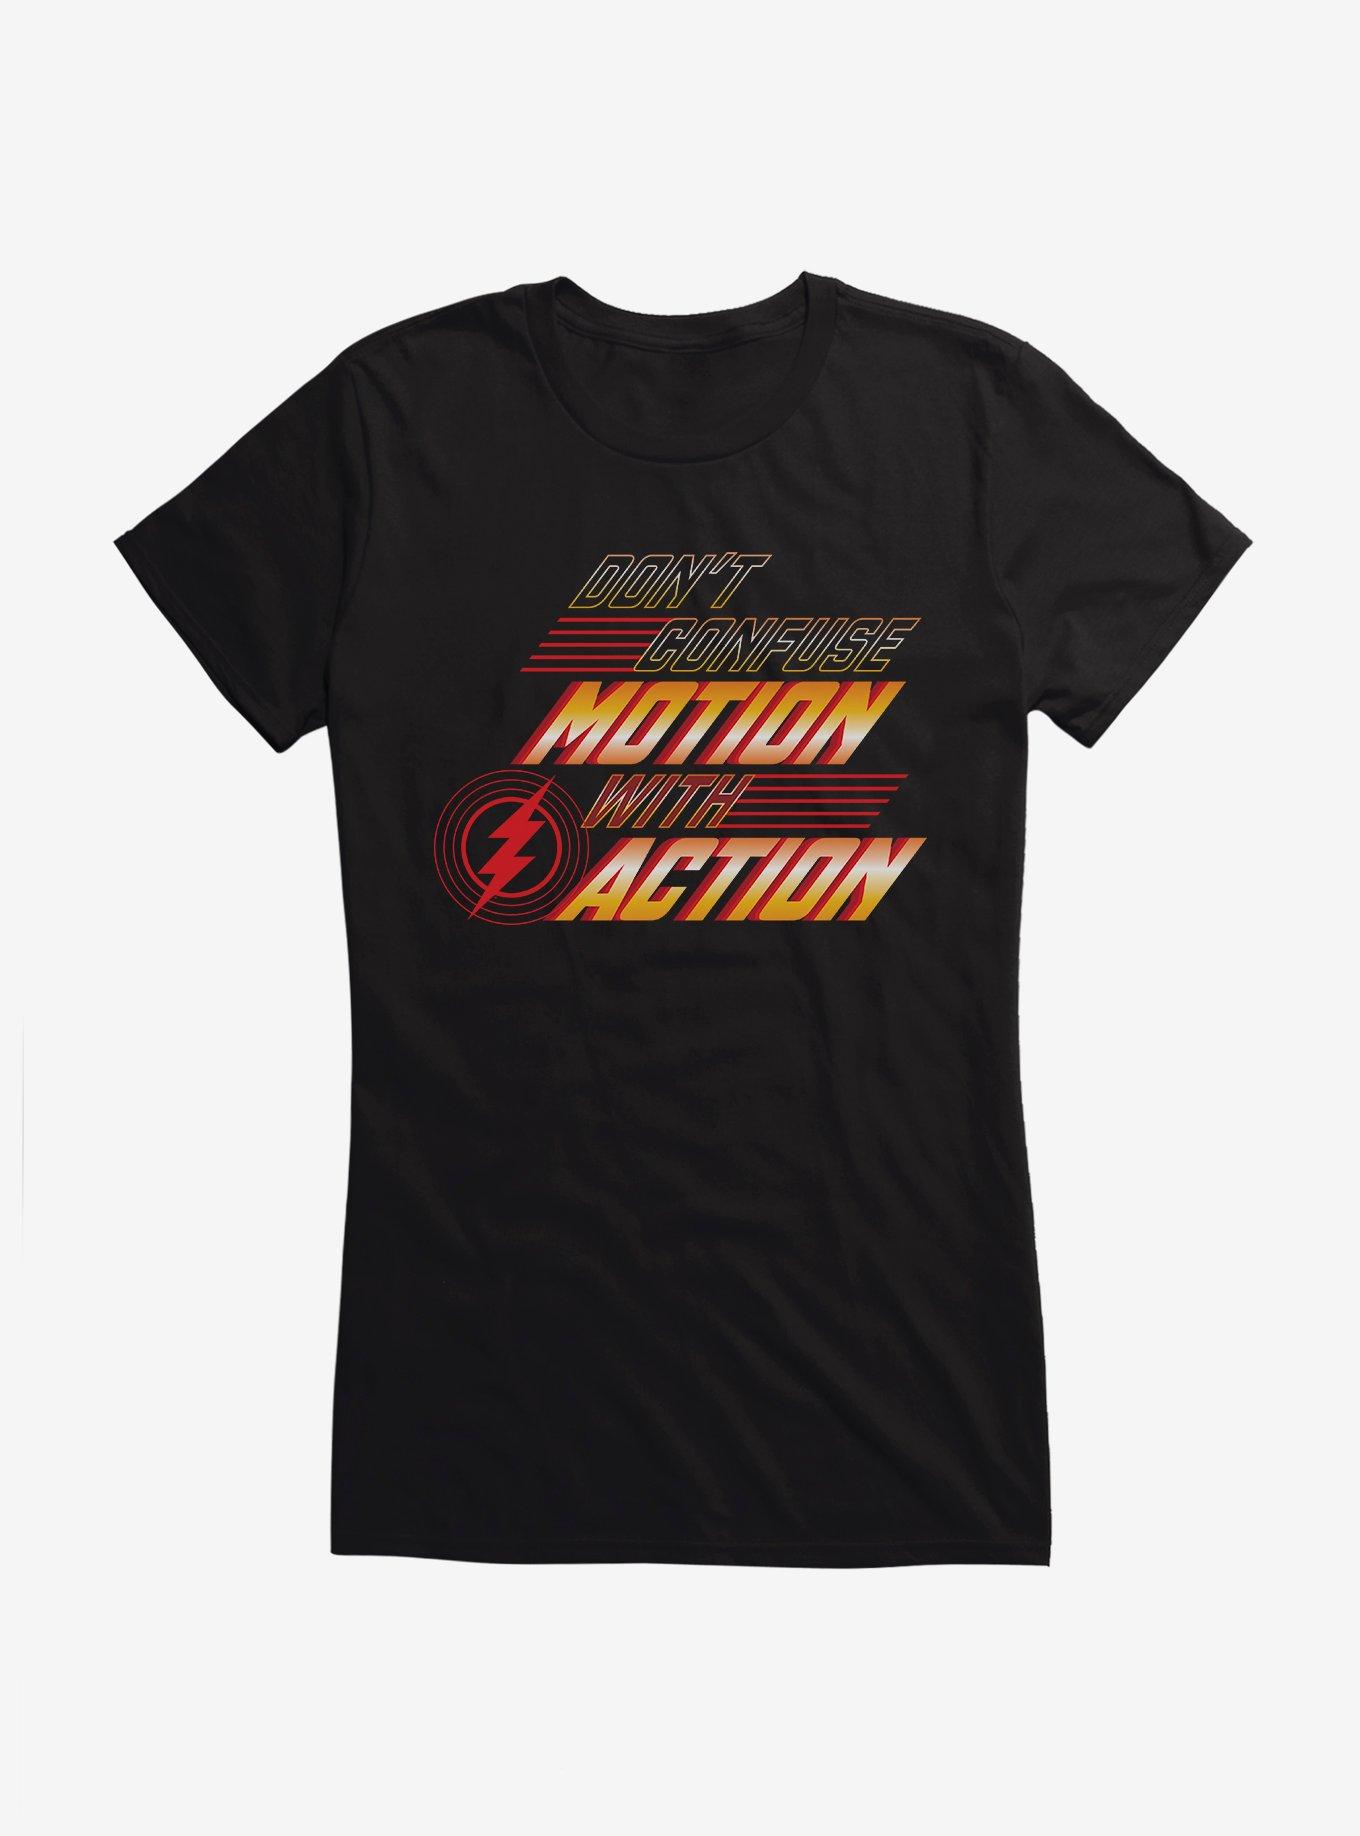 The Flash Dont Confuse Motion With Action Girls T-Shirt, BLACK, hi-res